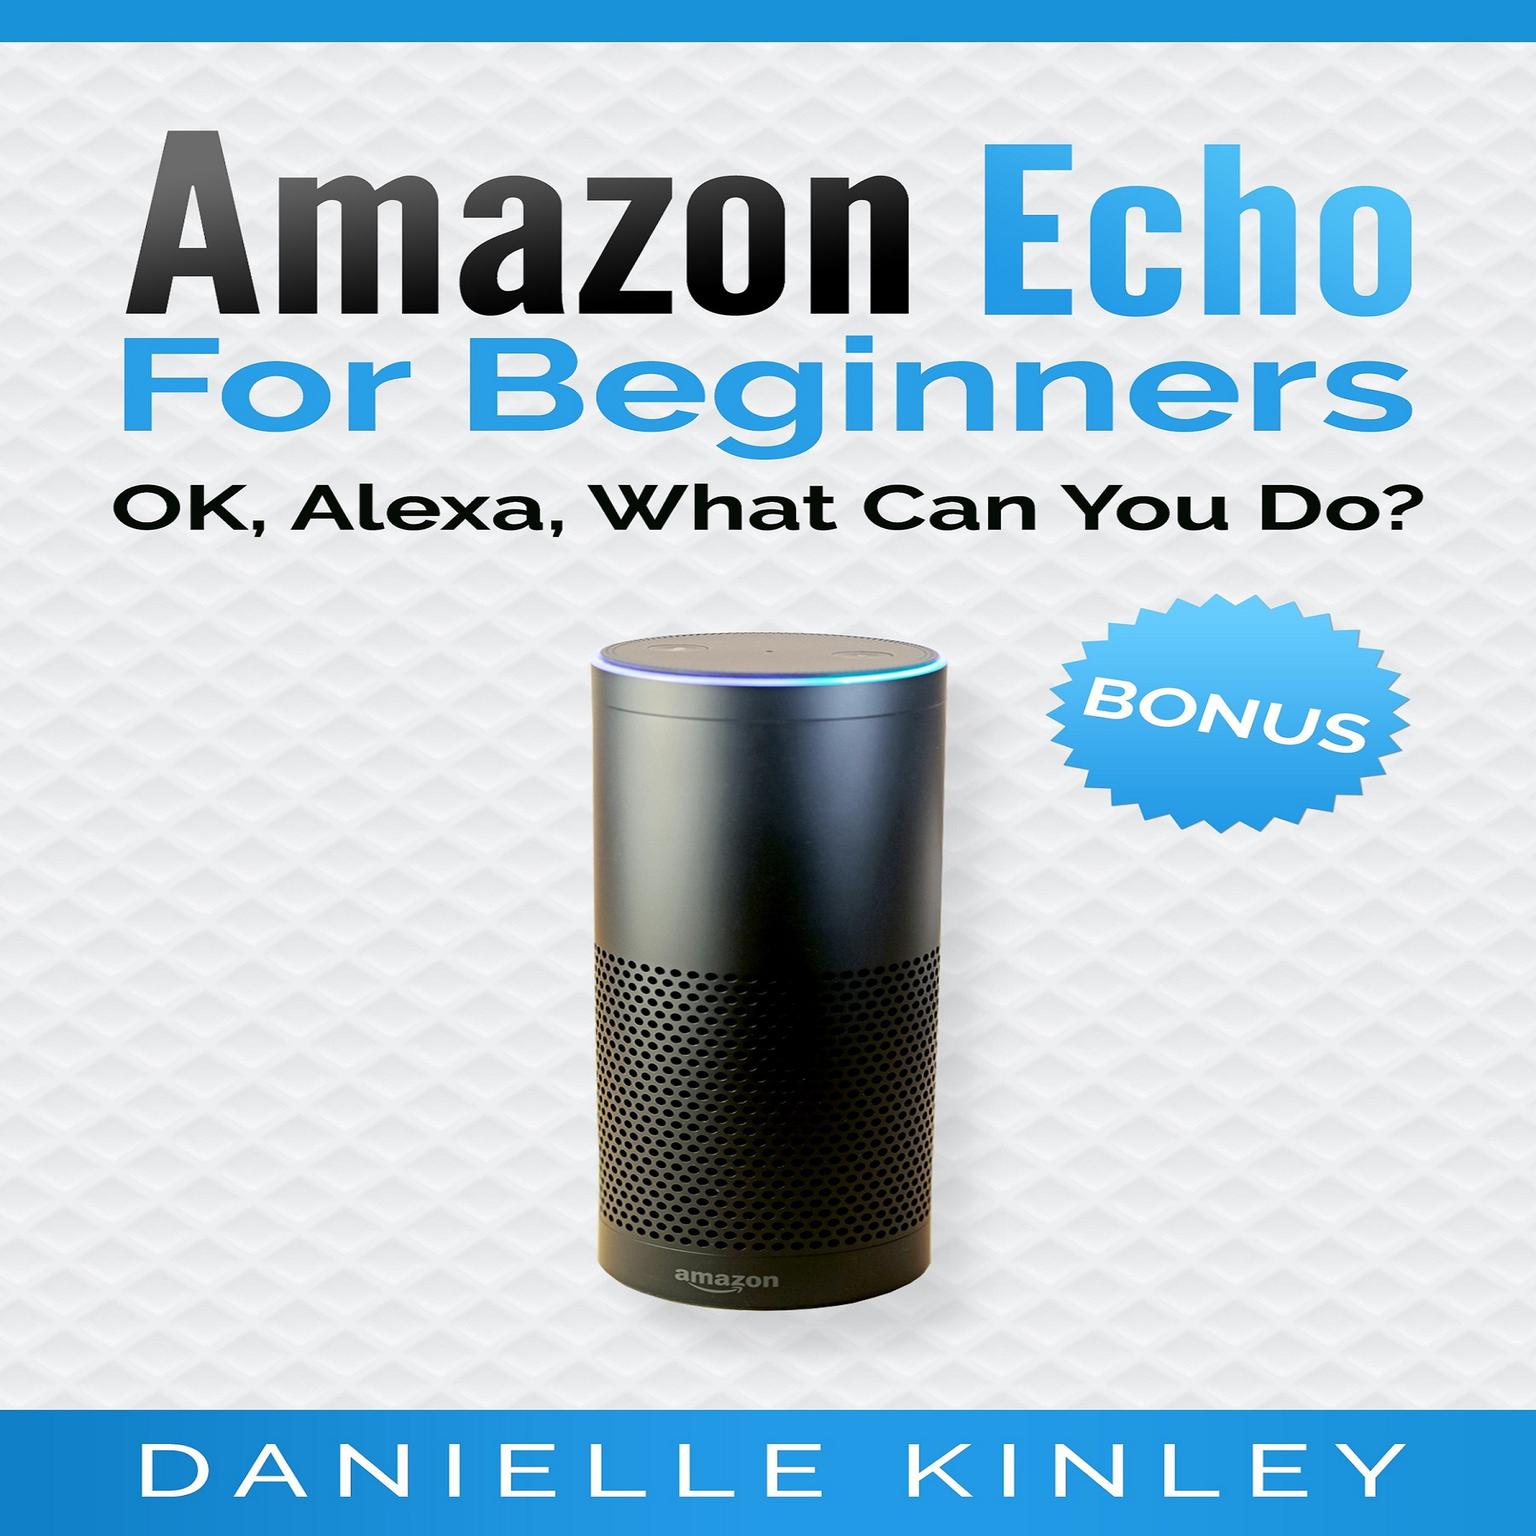 Amazon Echo for Beginners: OK, Alexa, What Can You Do? Audiobook, by Danielle Kinley